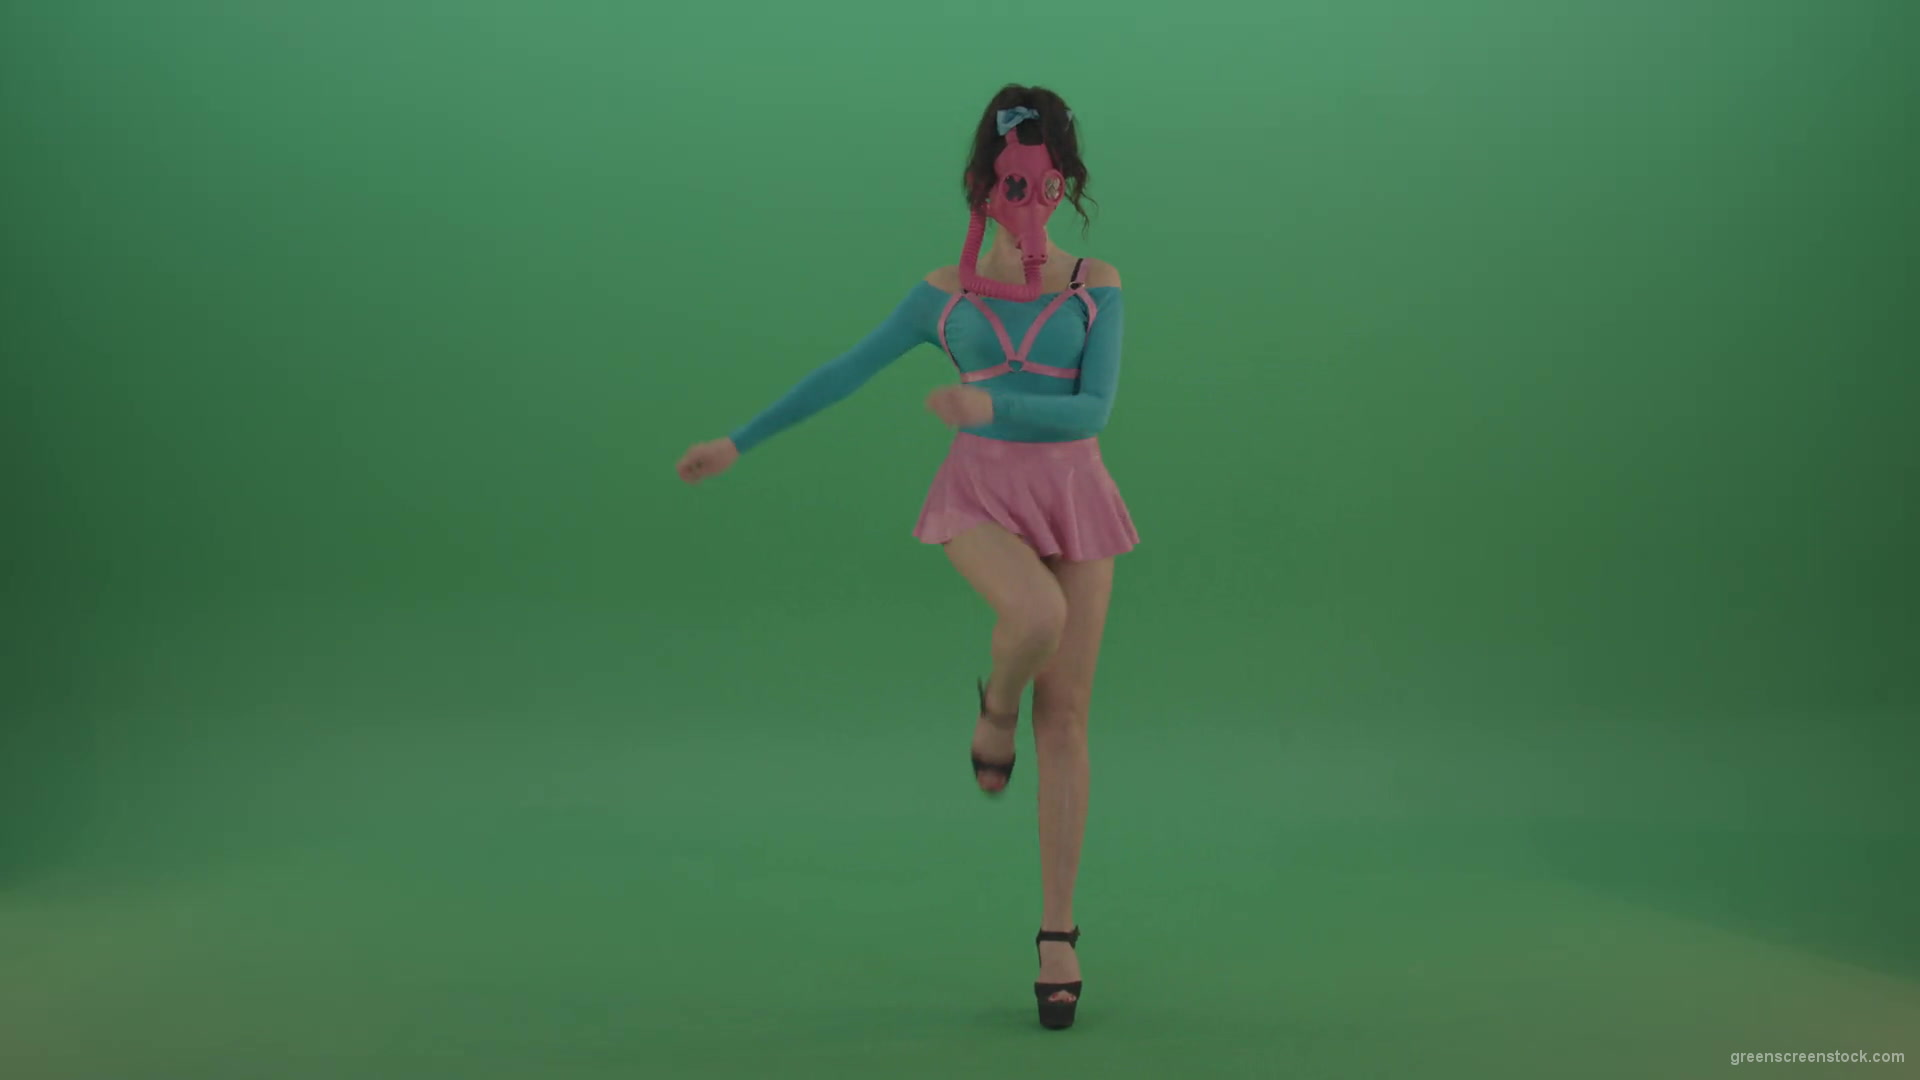 Sexy-Girl-in-Pink-Gas-Mask-marching-isolated-on-Green-Screen-4K-Video-Footage-1920_002 Green Screen Stock